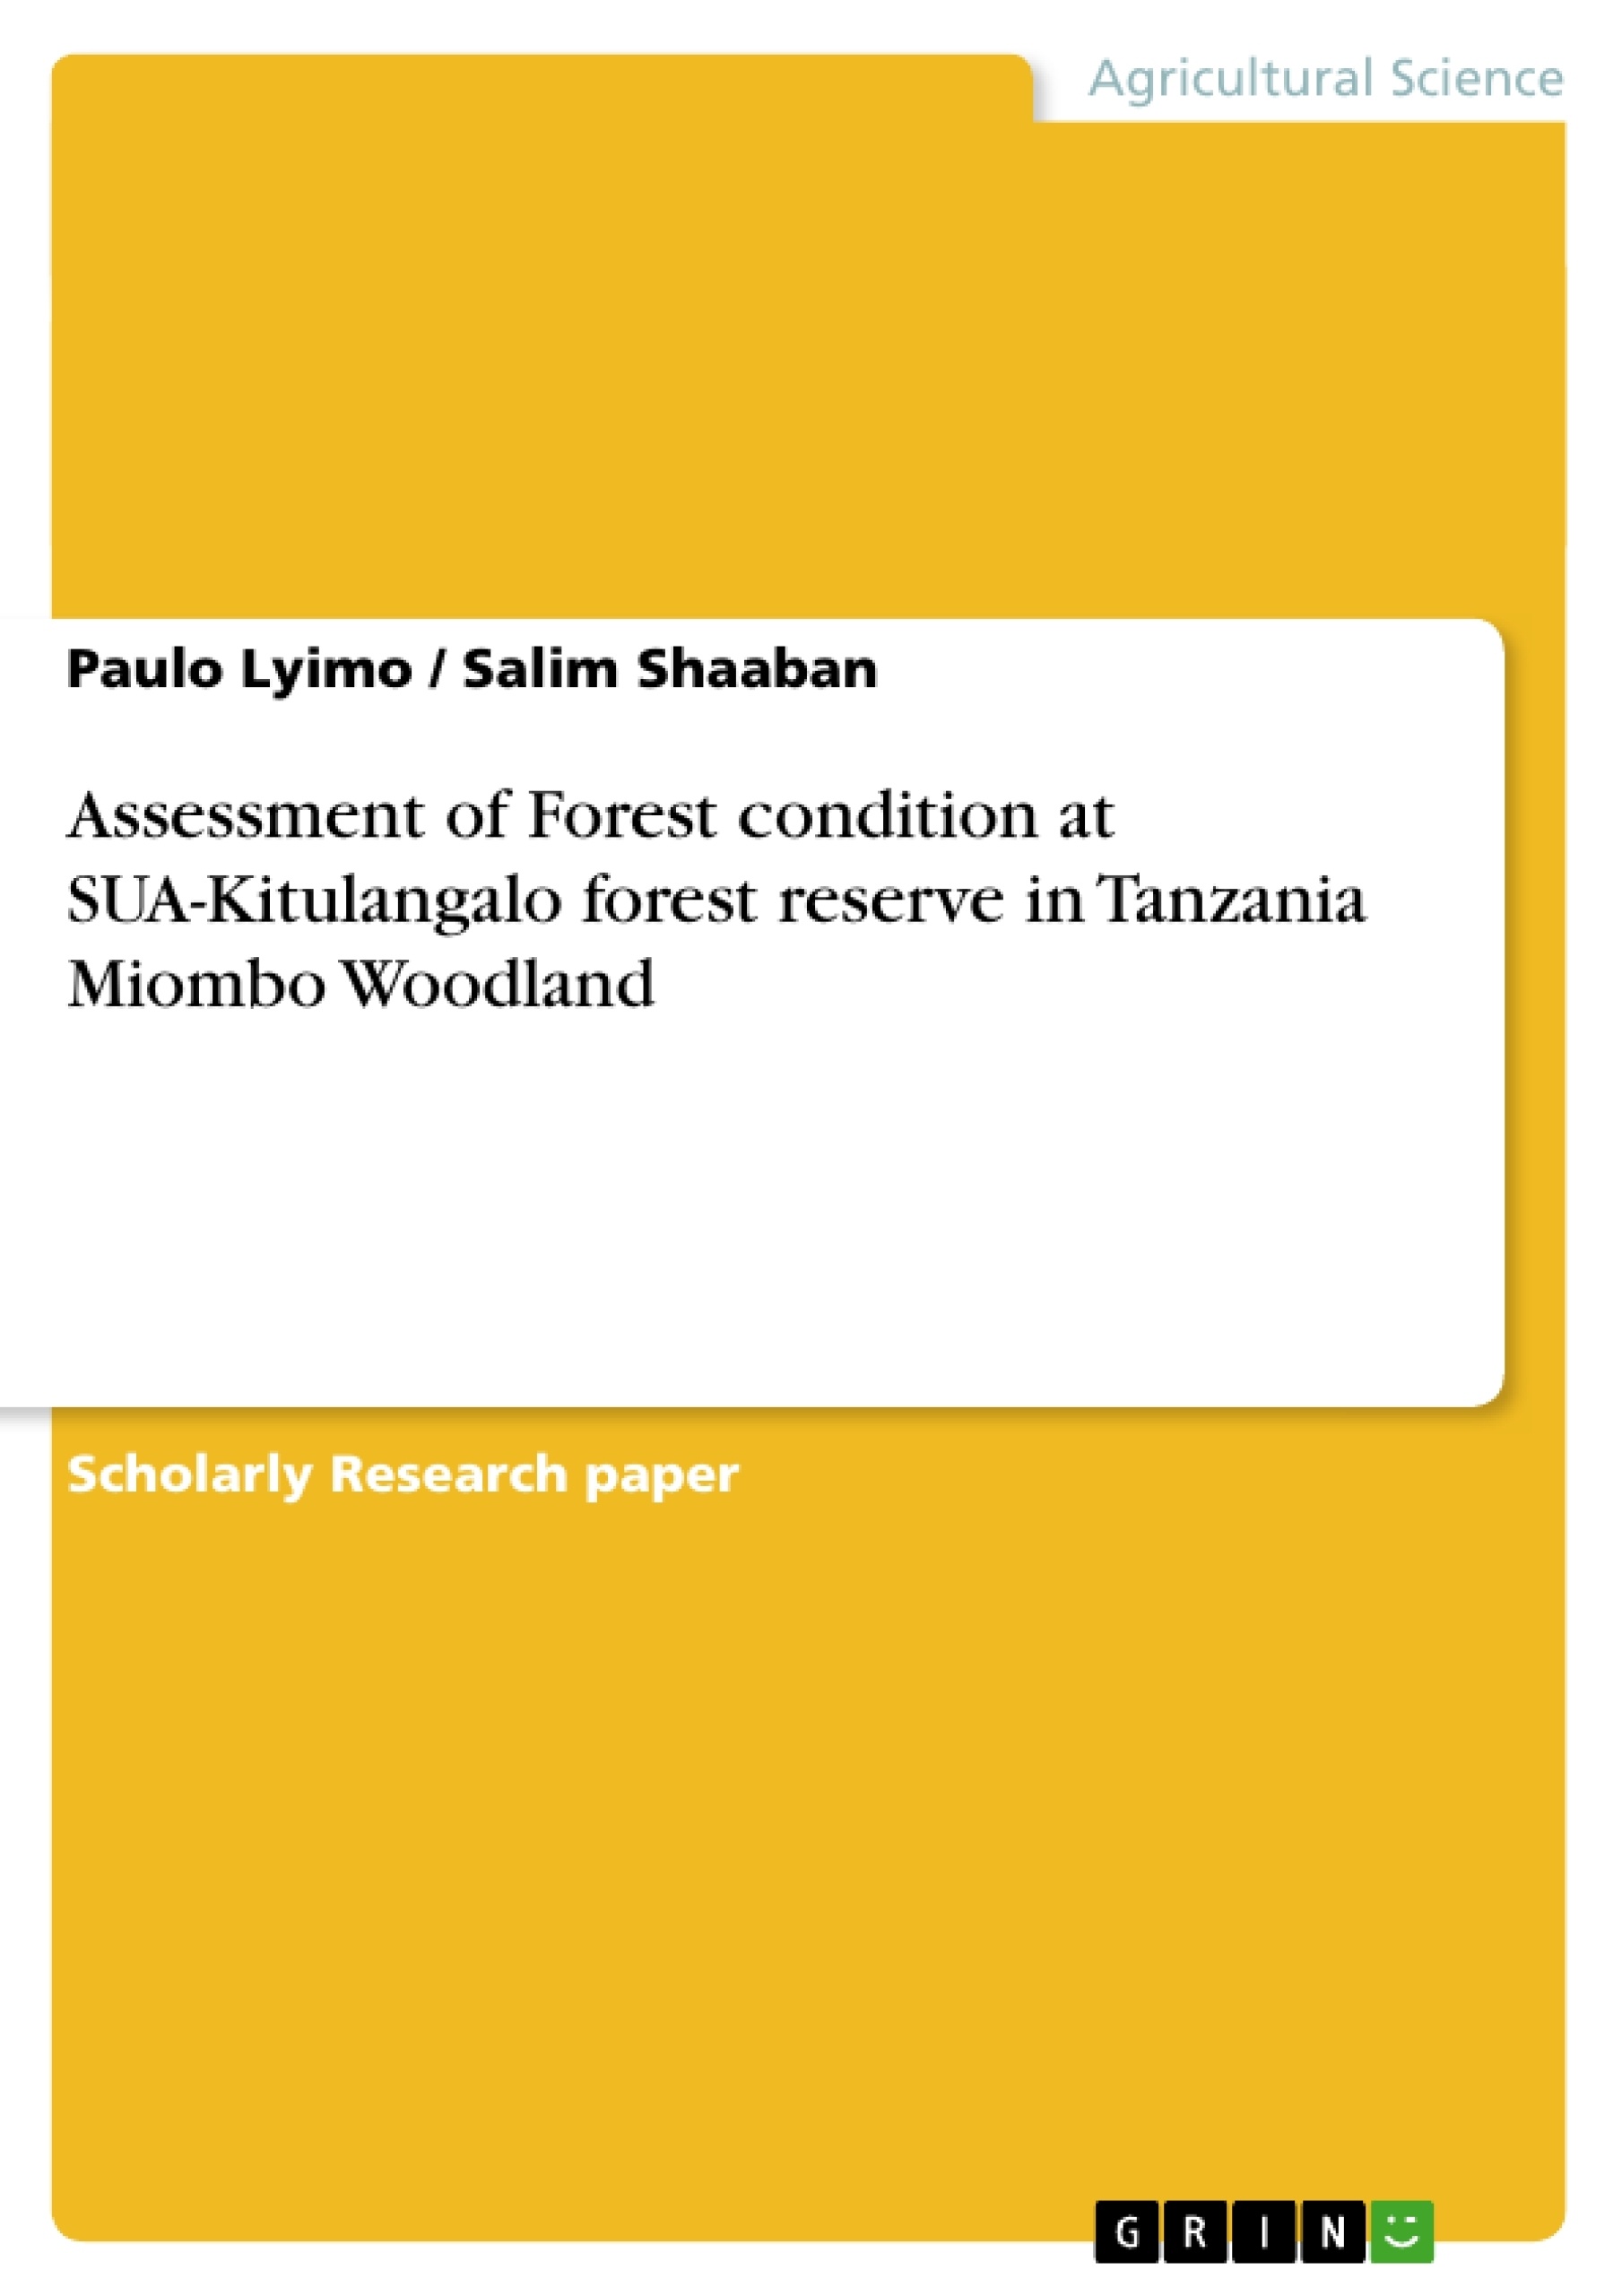 Titre: Assessment of Forest condition at SUA-Kitulangalo forest reserve in Tanzania Miombo Woodland